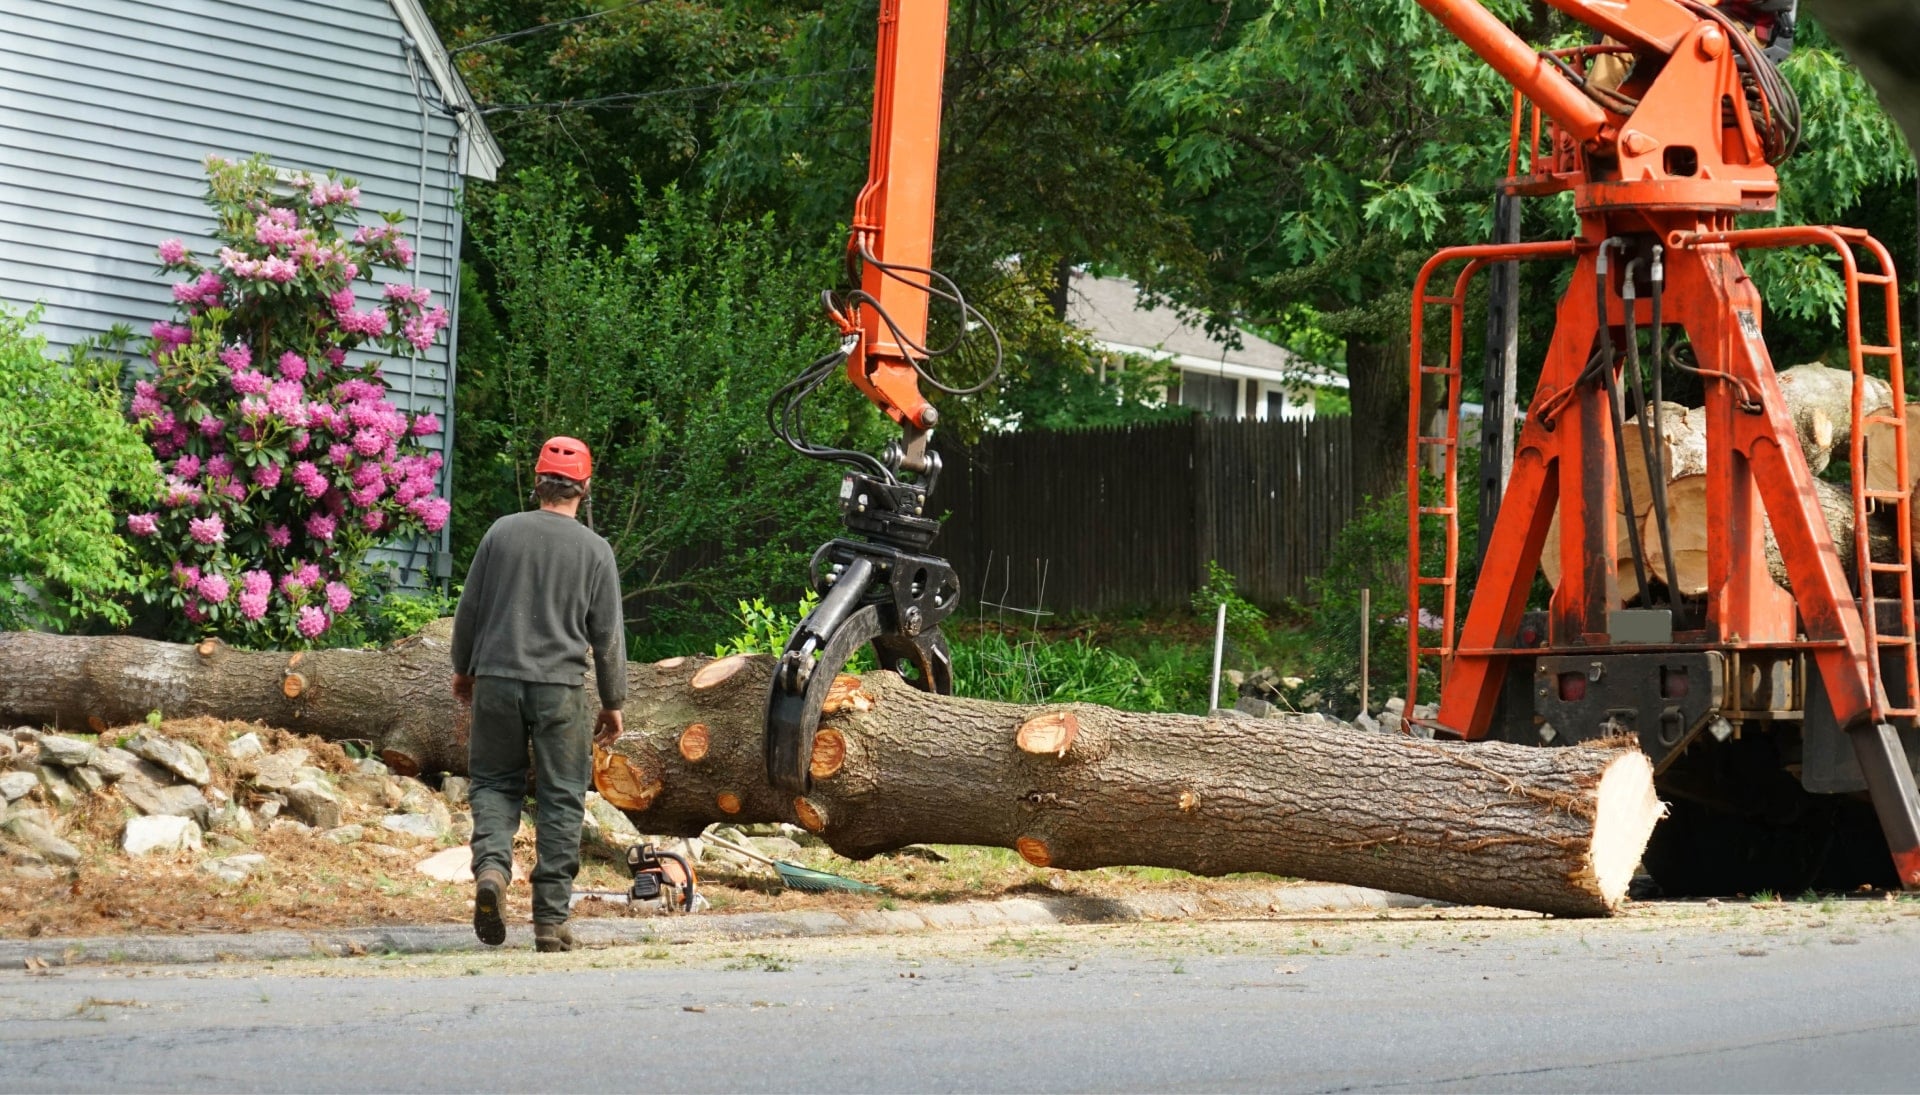 Local partner for Tree removal services in Huntington